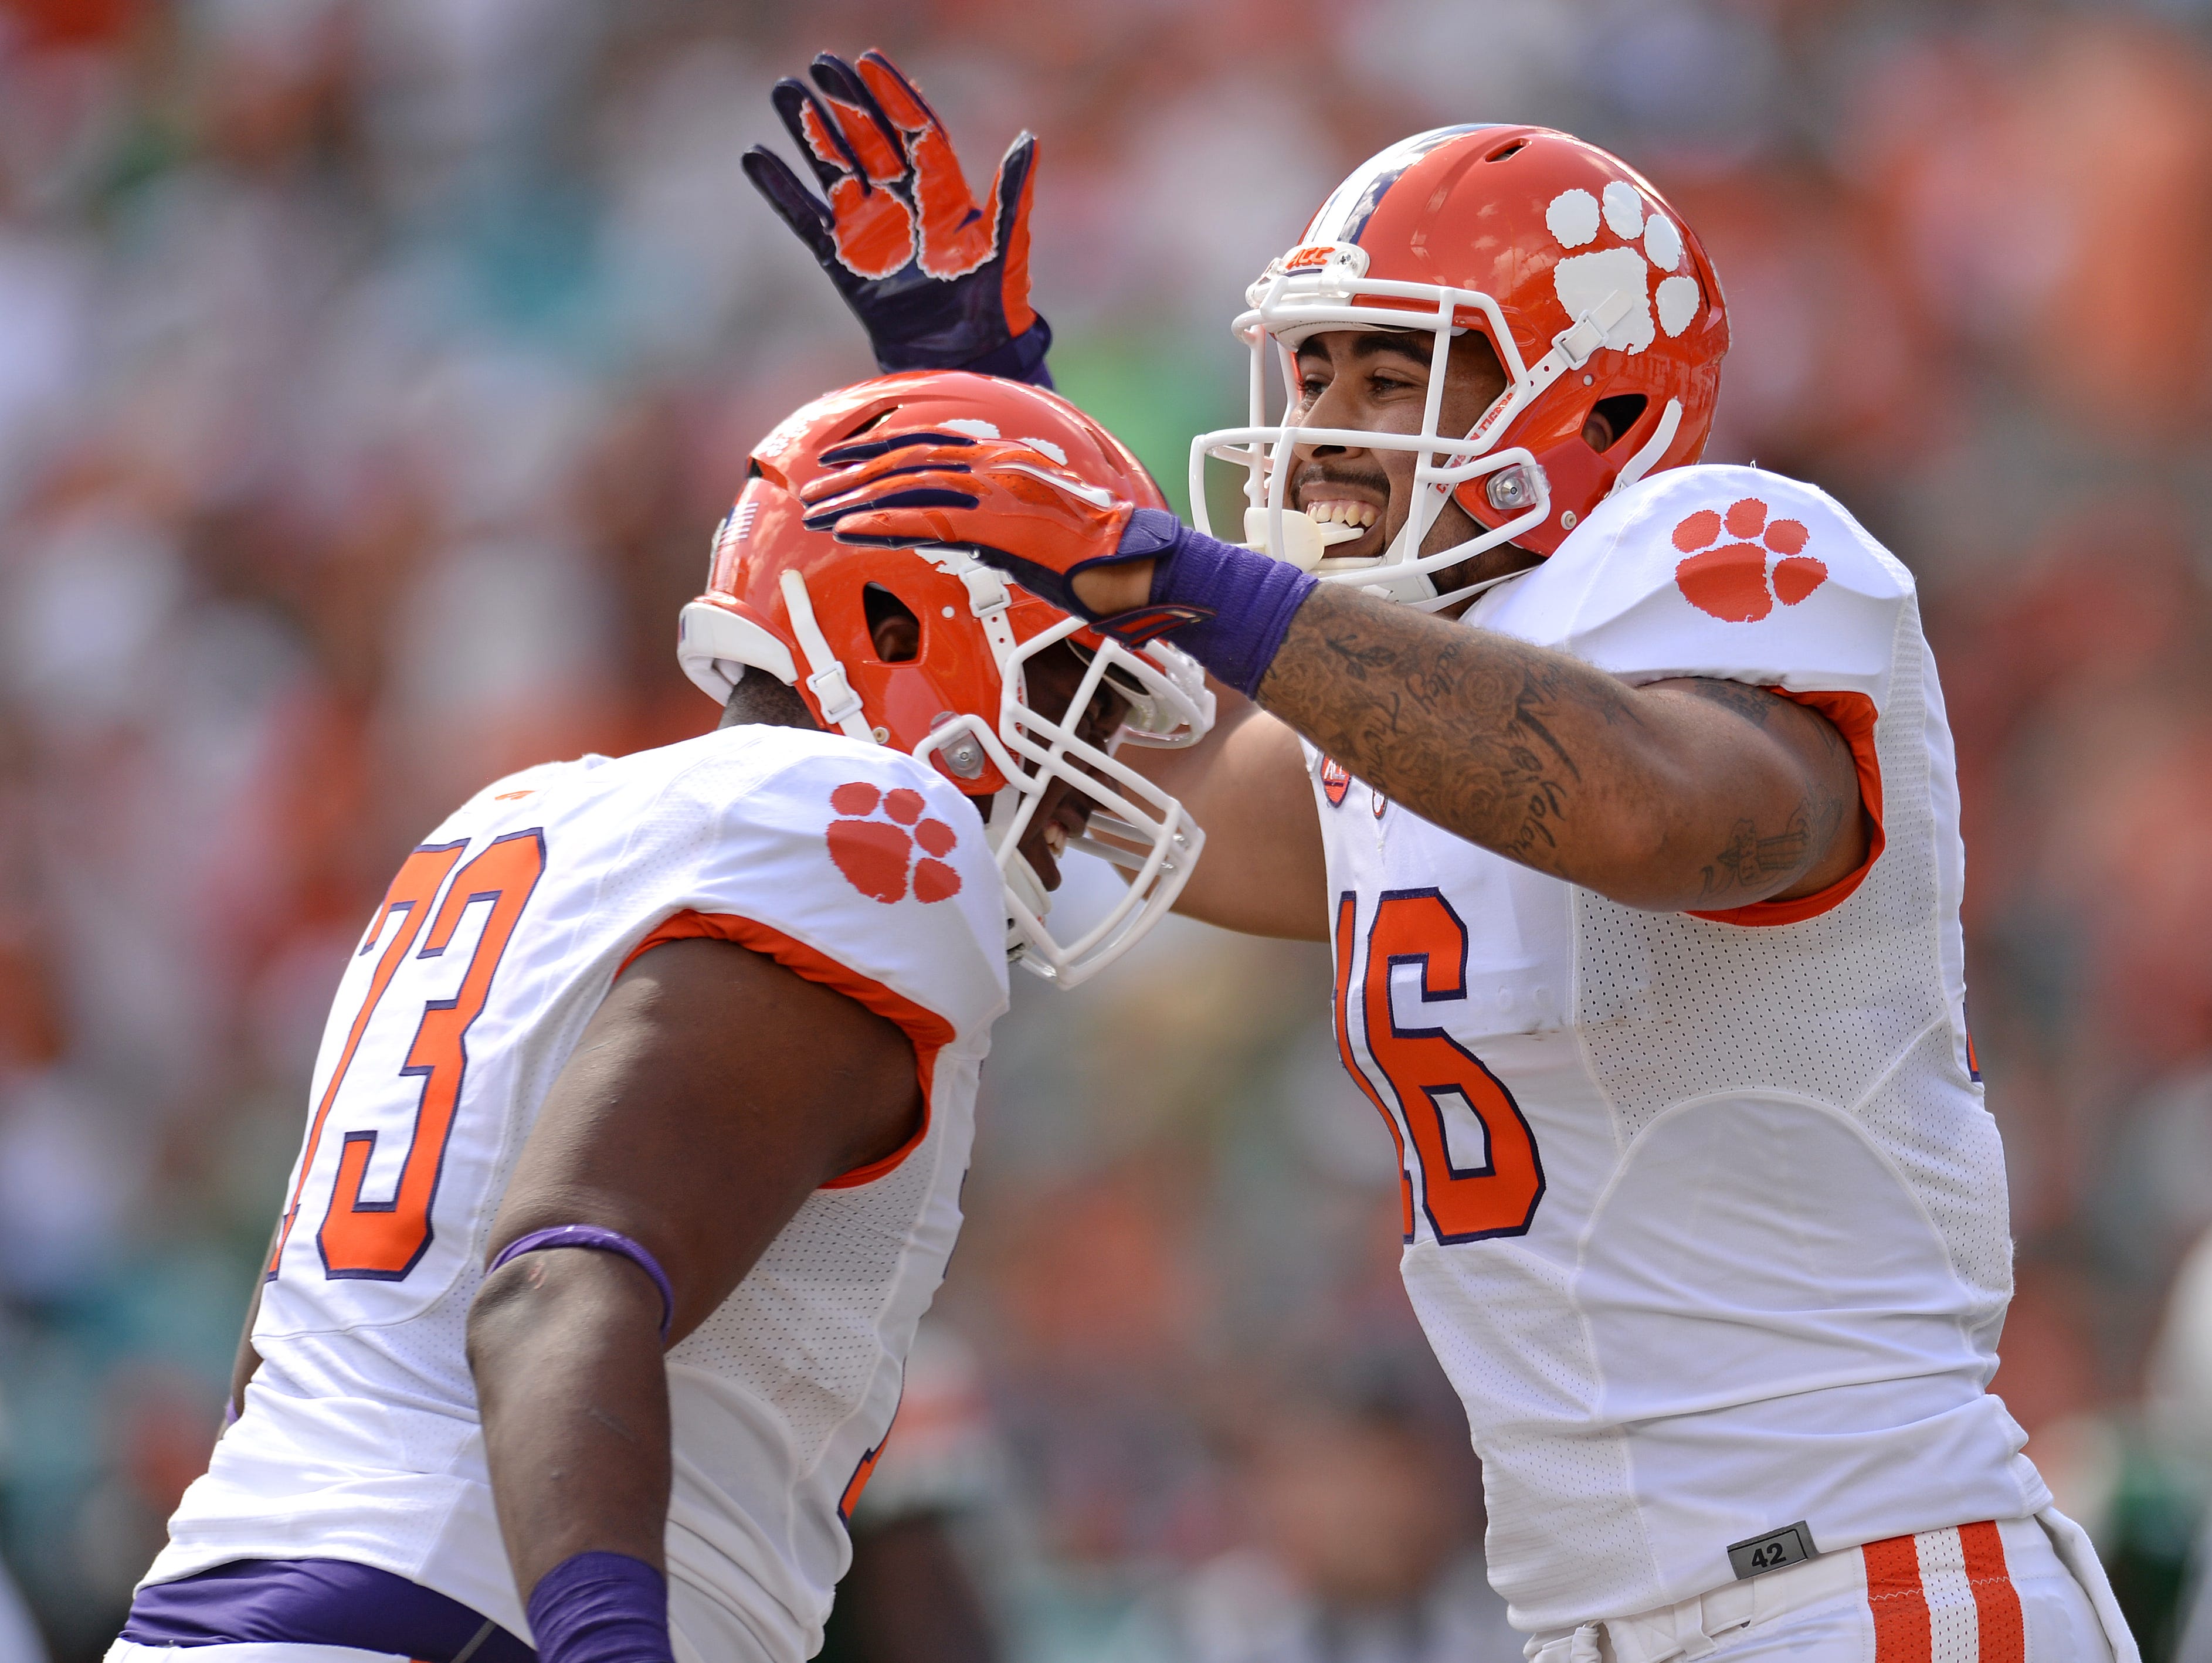 Clemson tight end Jordan Leggett (16) celebrates with offensive tackle Joe Gore (73) after scoring on a 34 yard reception against Miami during the 1st quarter Saturday, Oct. 24, 2015, in Miami Gardens, Fla. The TD was Leggett's 5th TD in 5 consecutive games.